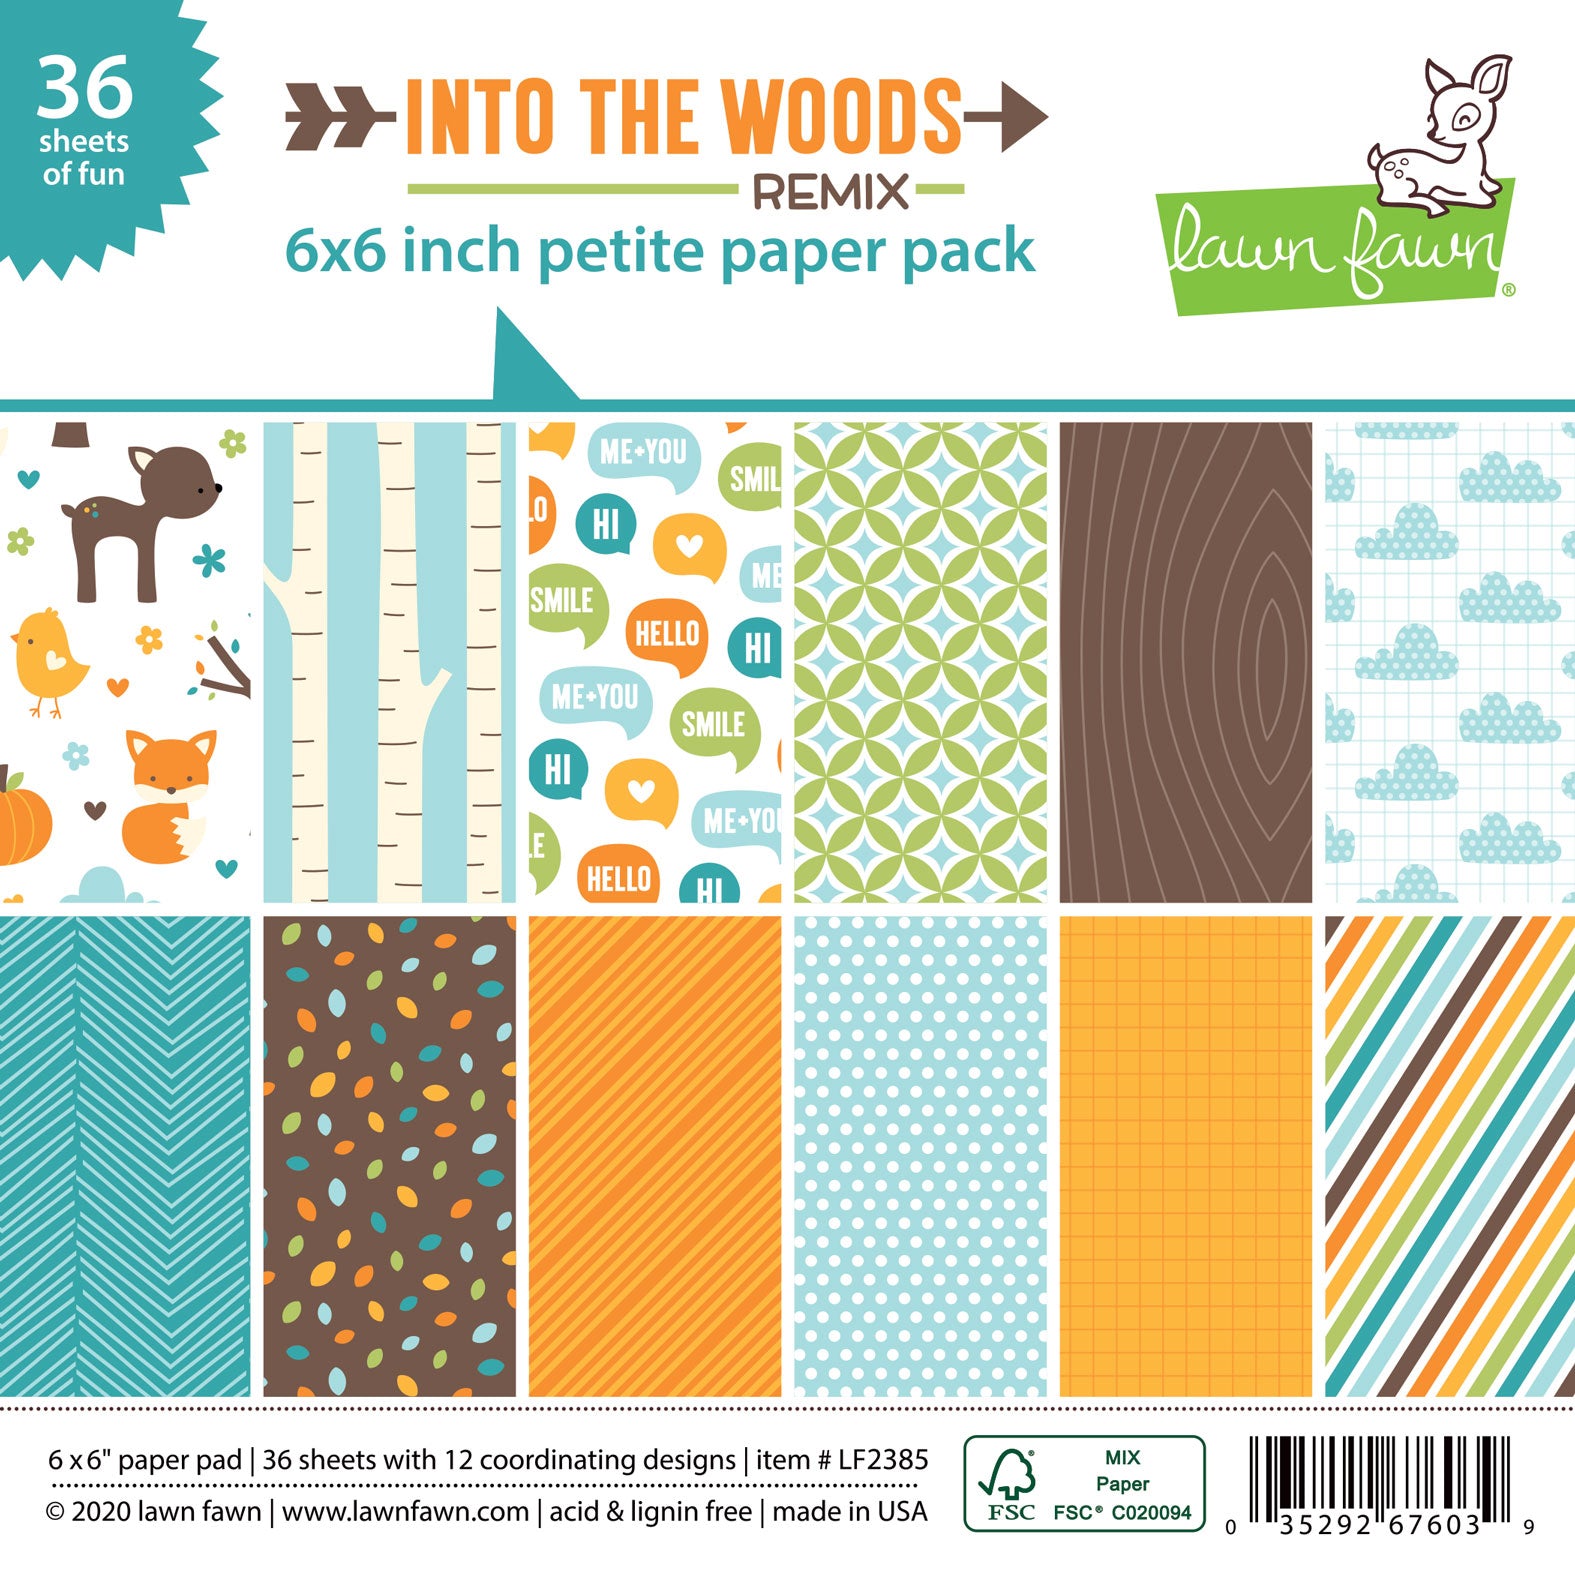 Lot of 3 light blue with vines 12 x 12 scrapbook paper